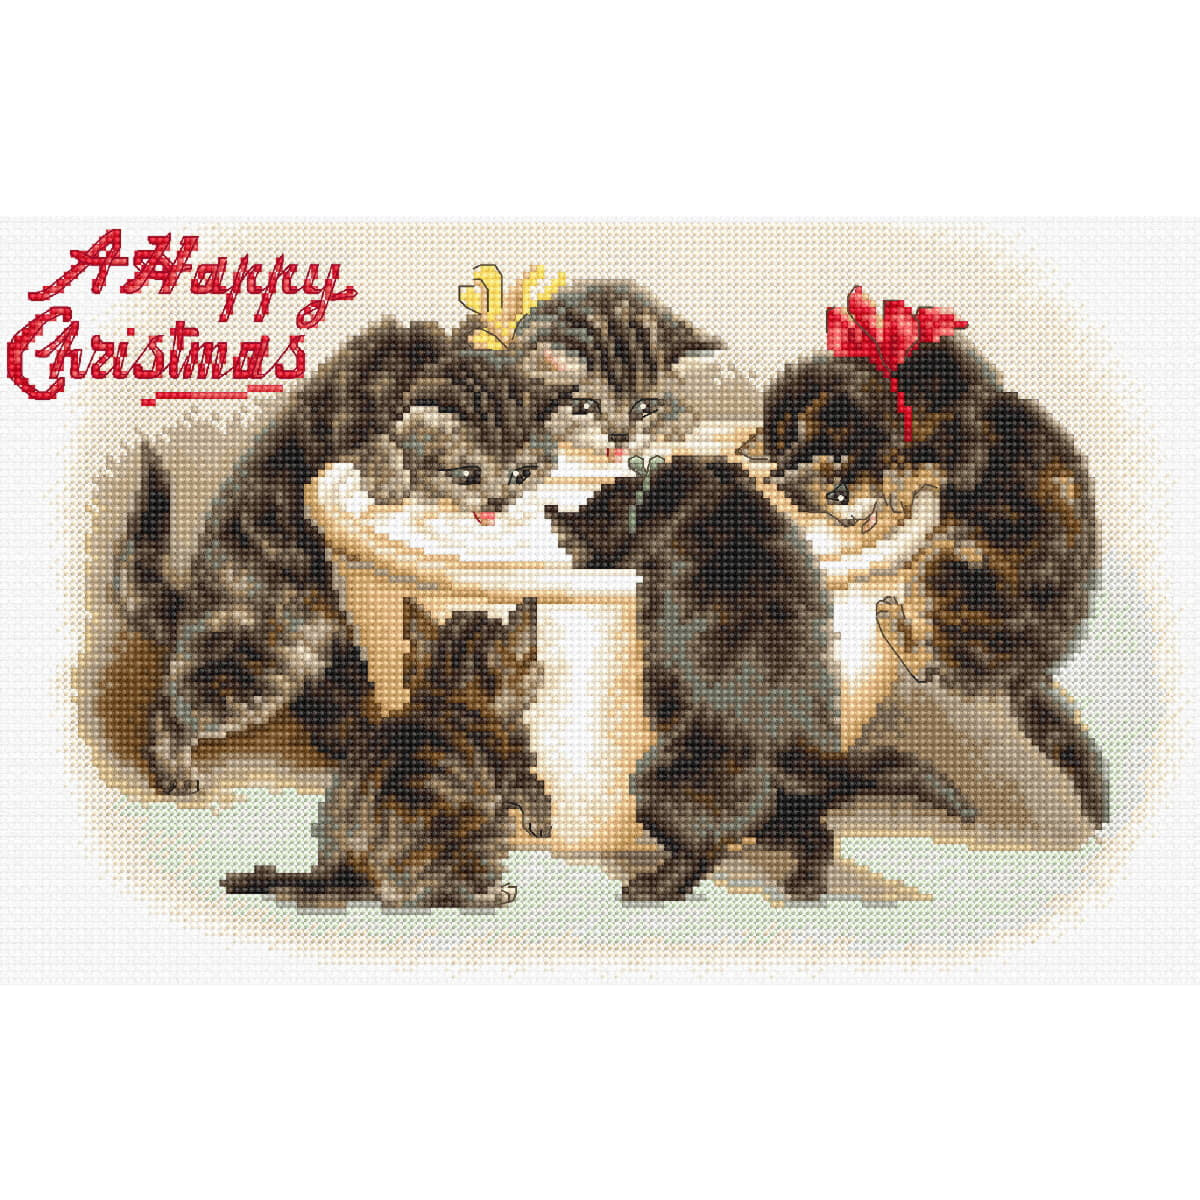 An adorable cross stitch picture of kittens playing...